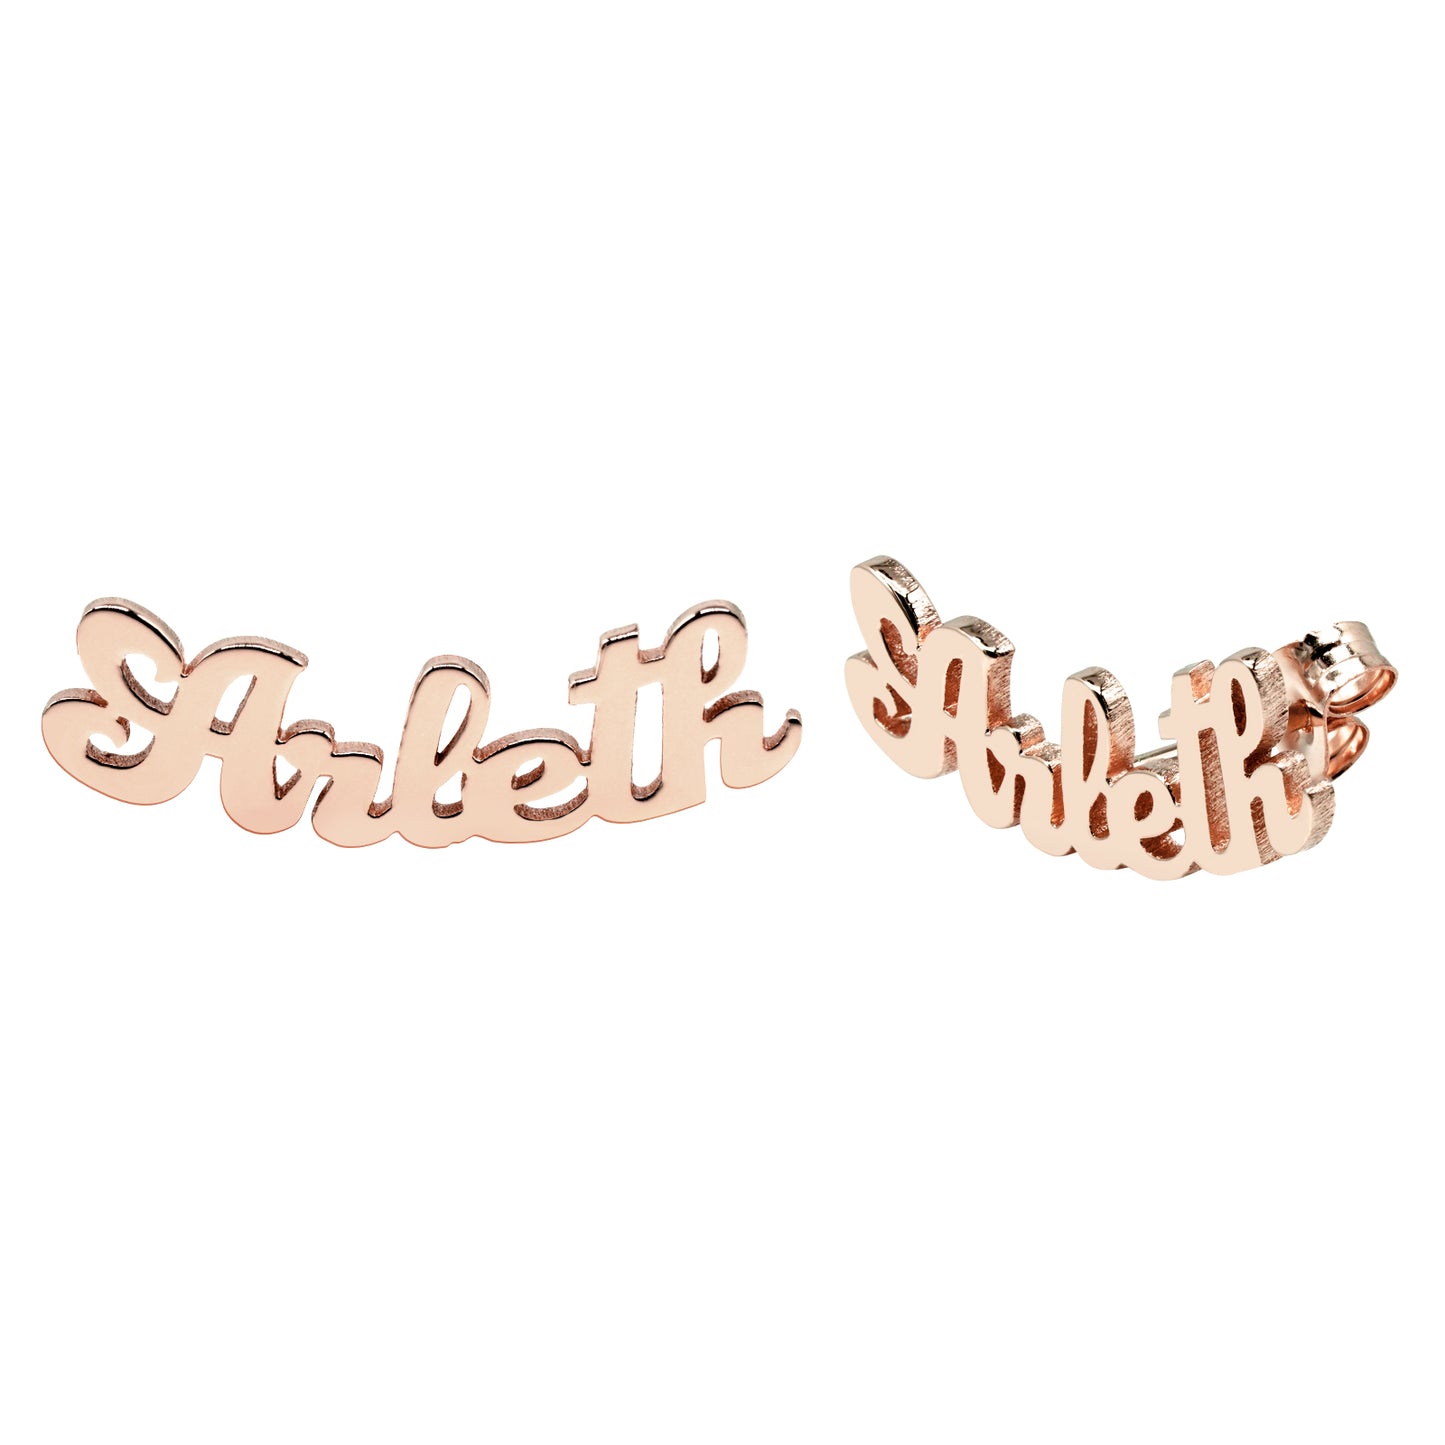 Customized Name Plate Stud Earrings in 14K Solid Gold